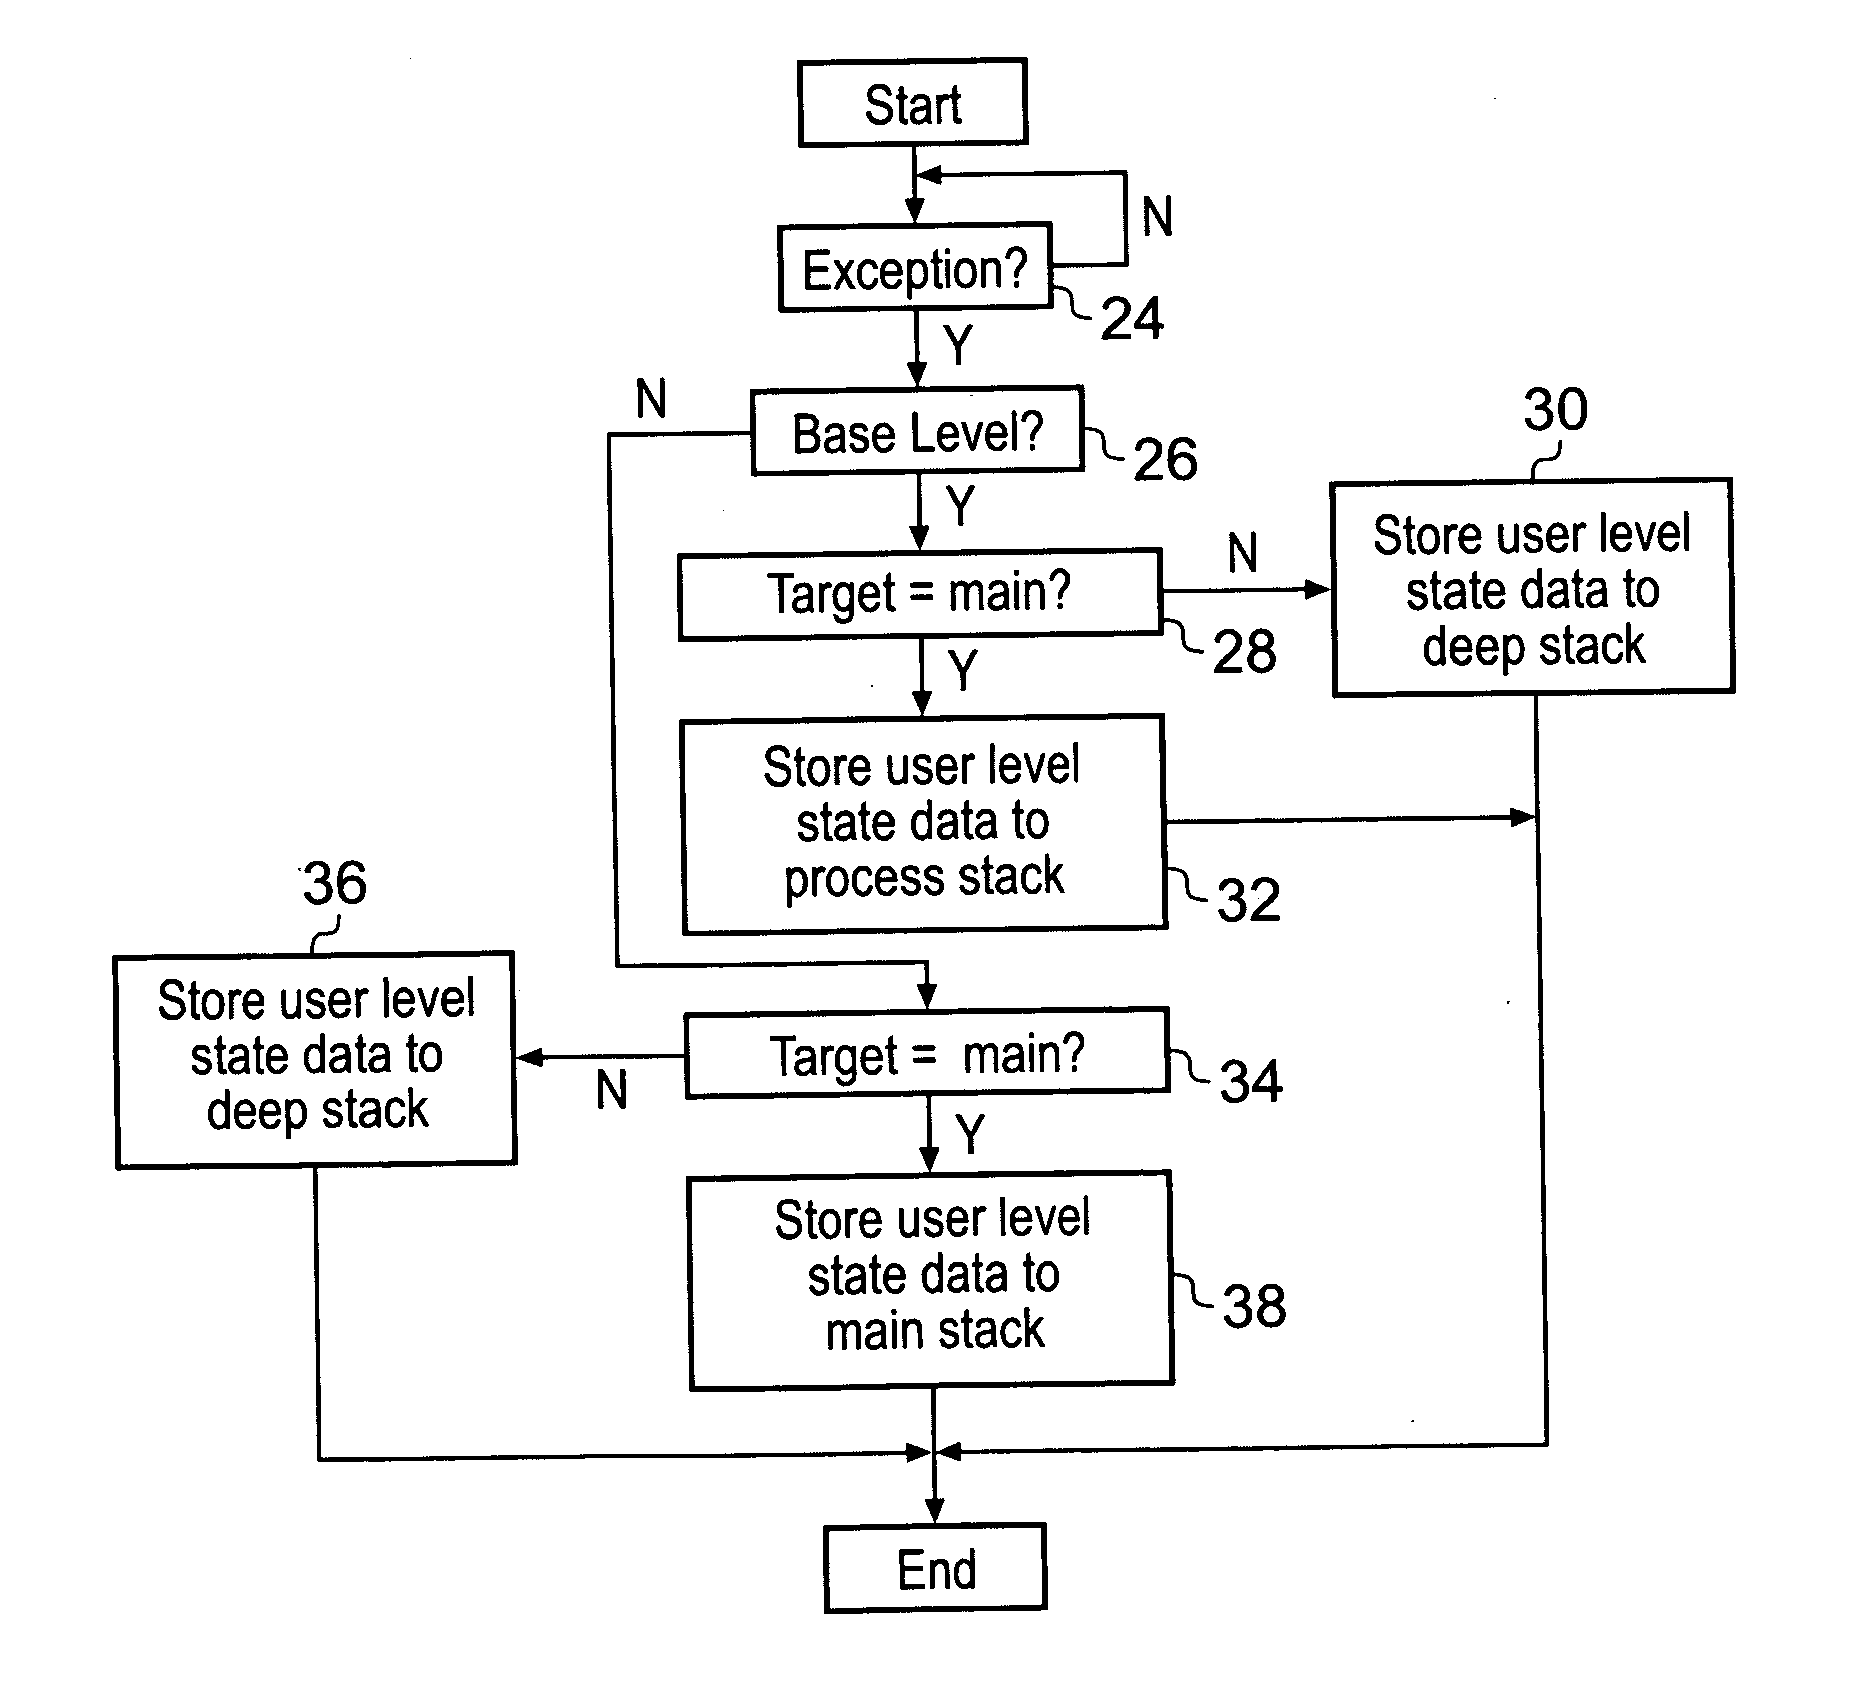 Stack memory selection upon exception in a data processing system